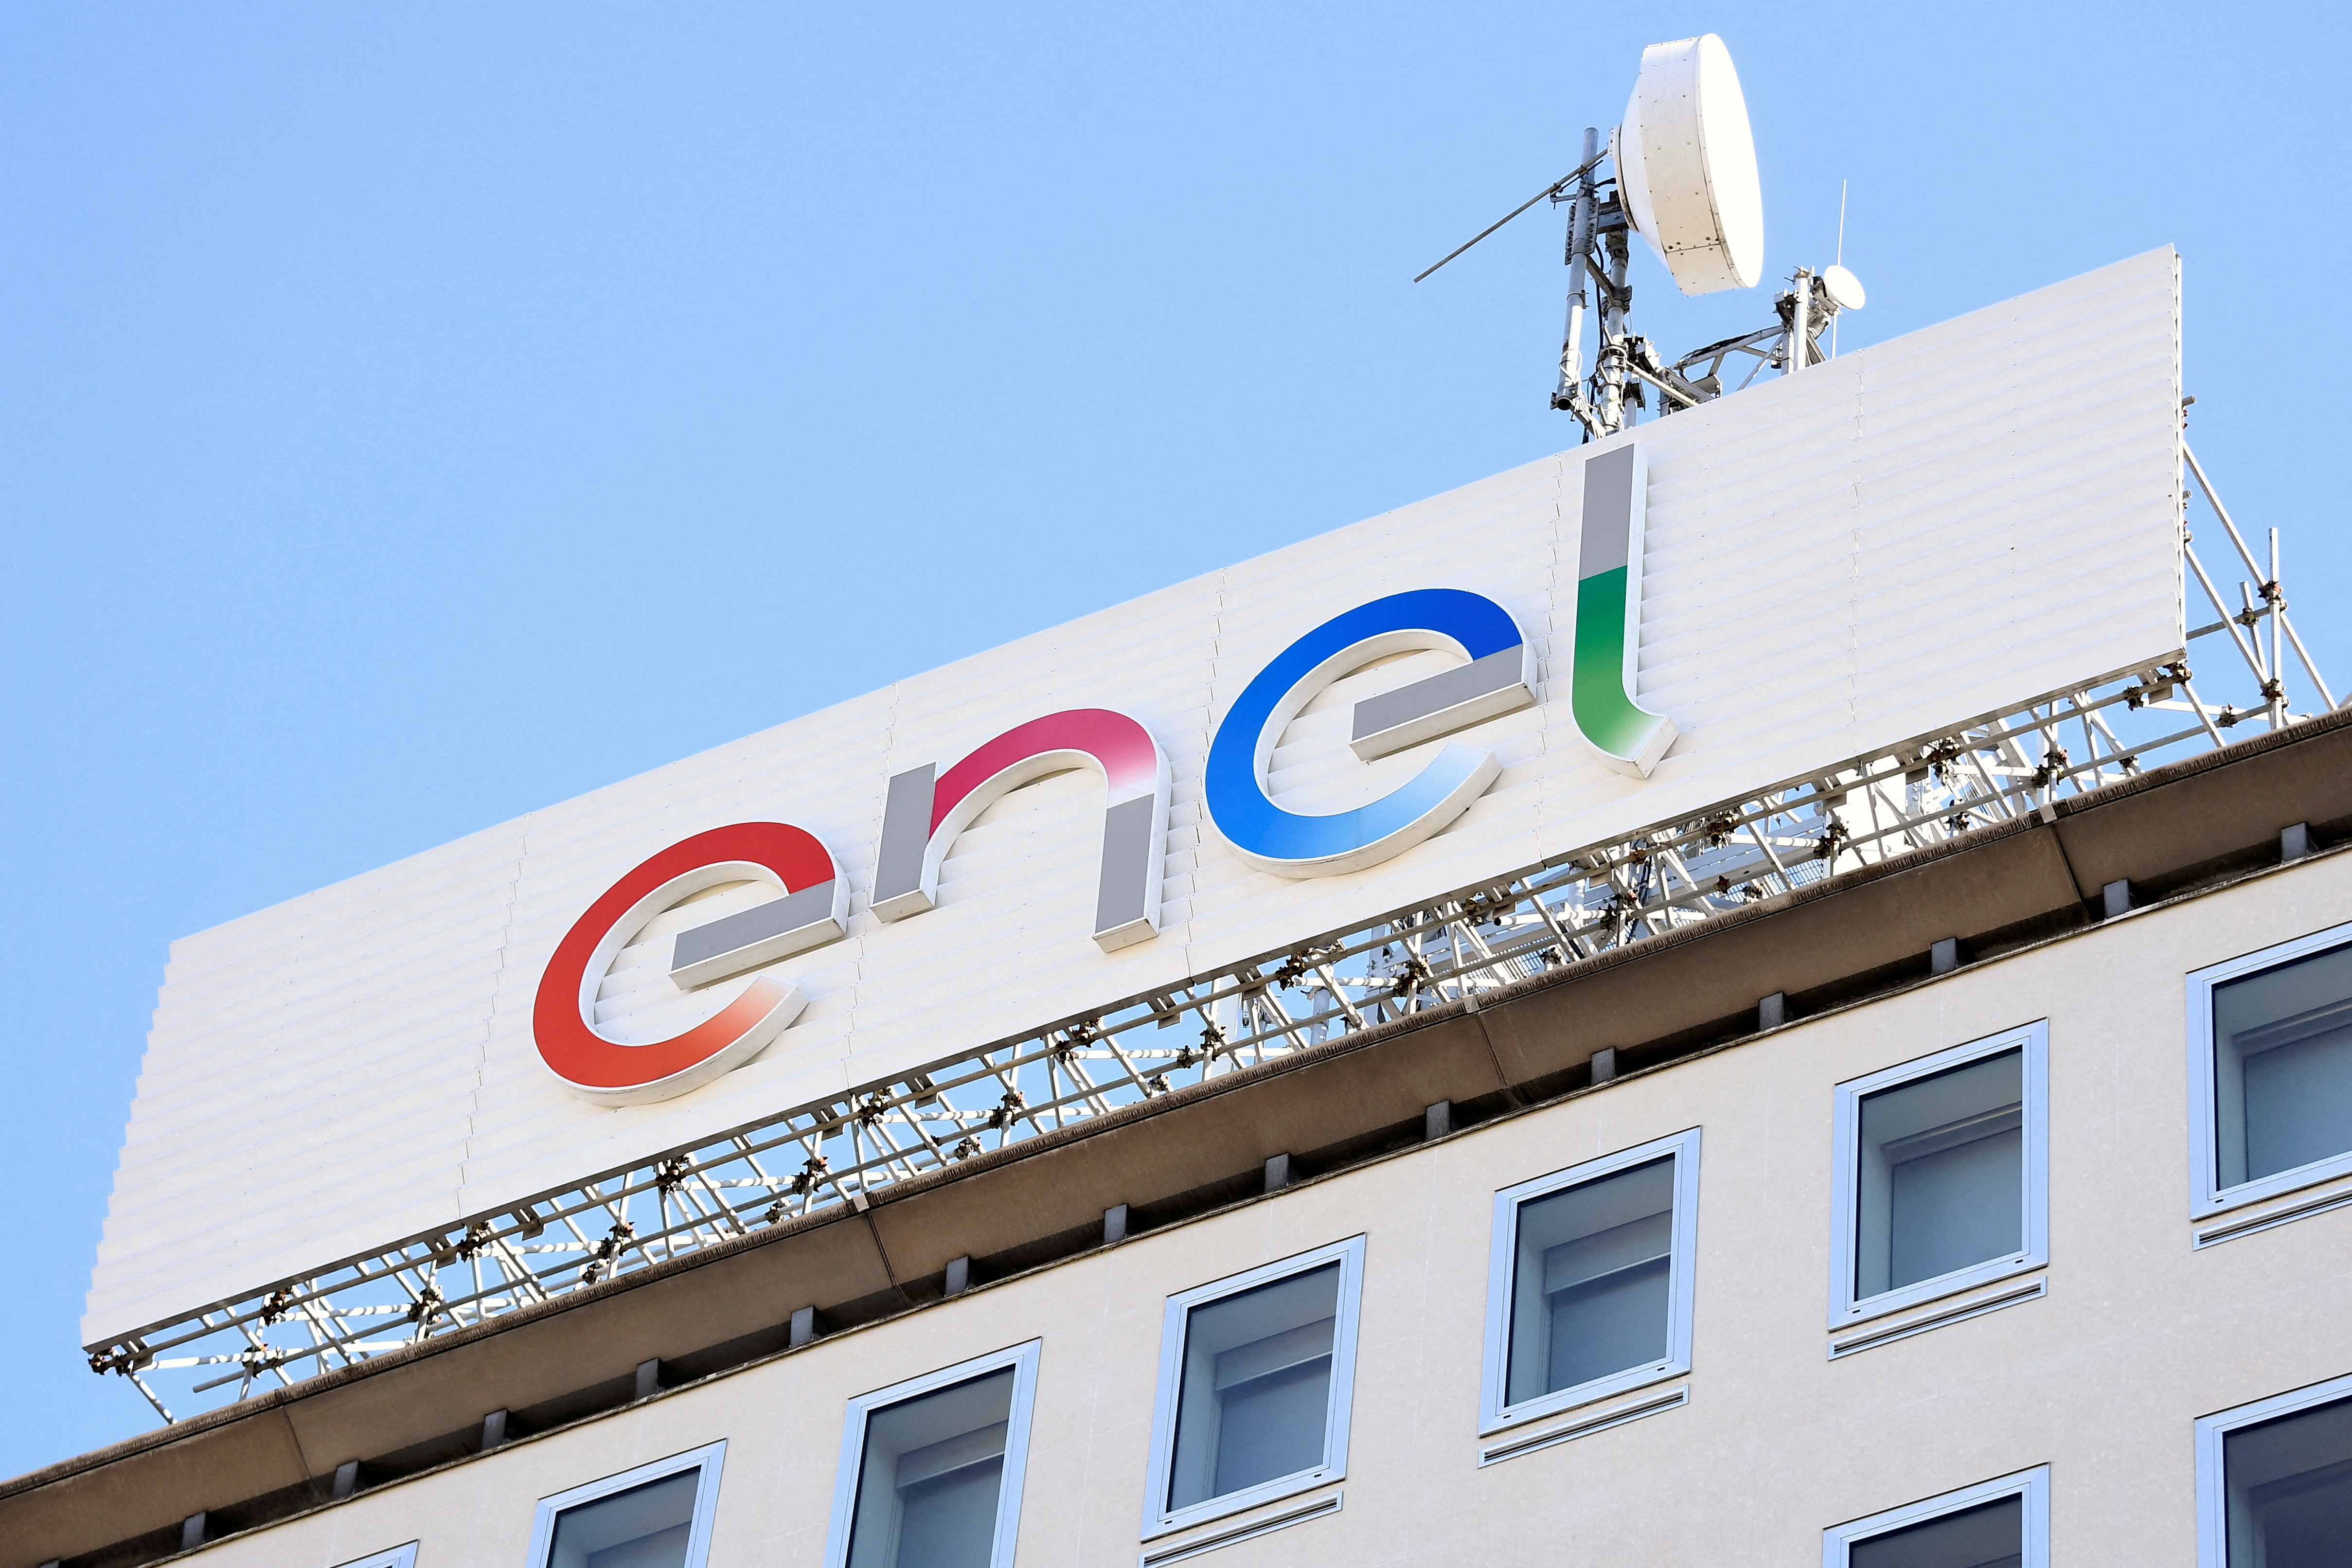 Italy's A2A signs $1.3 bln deal with Enel for distribution